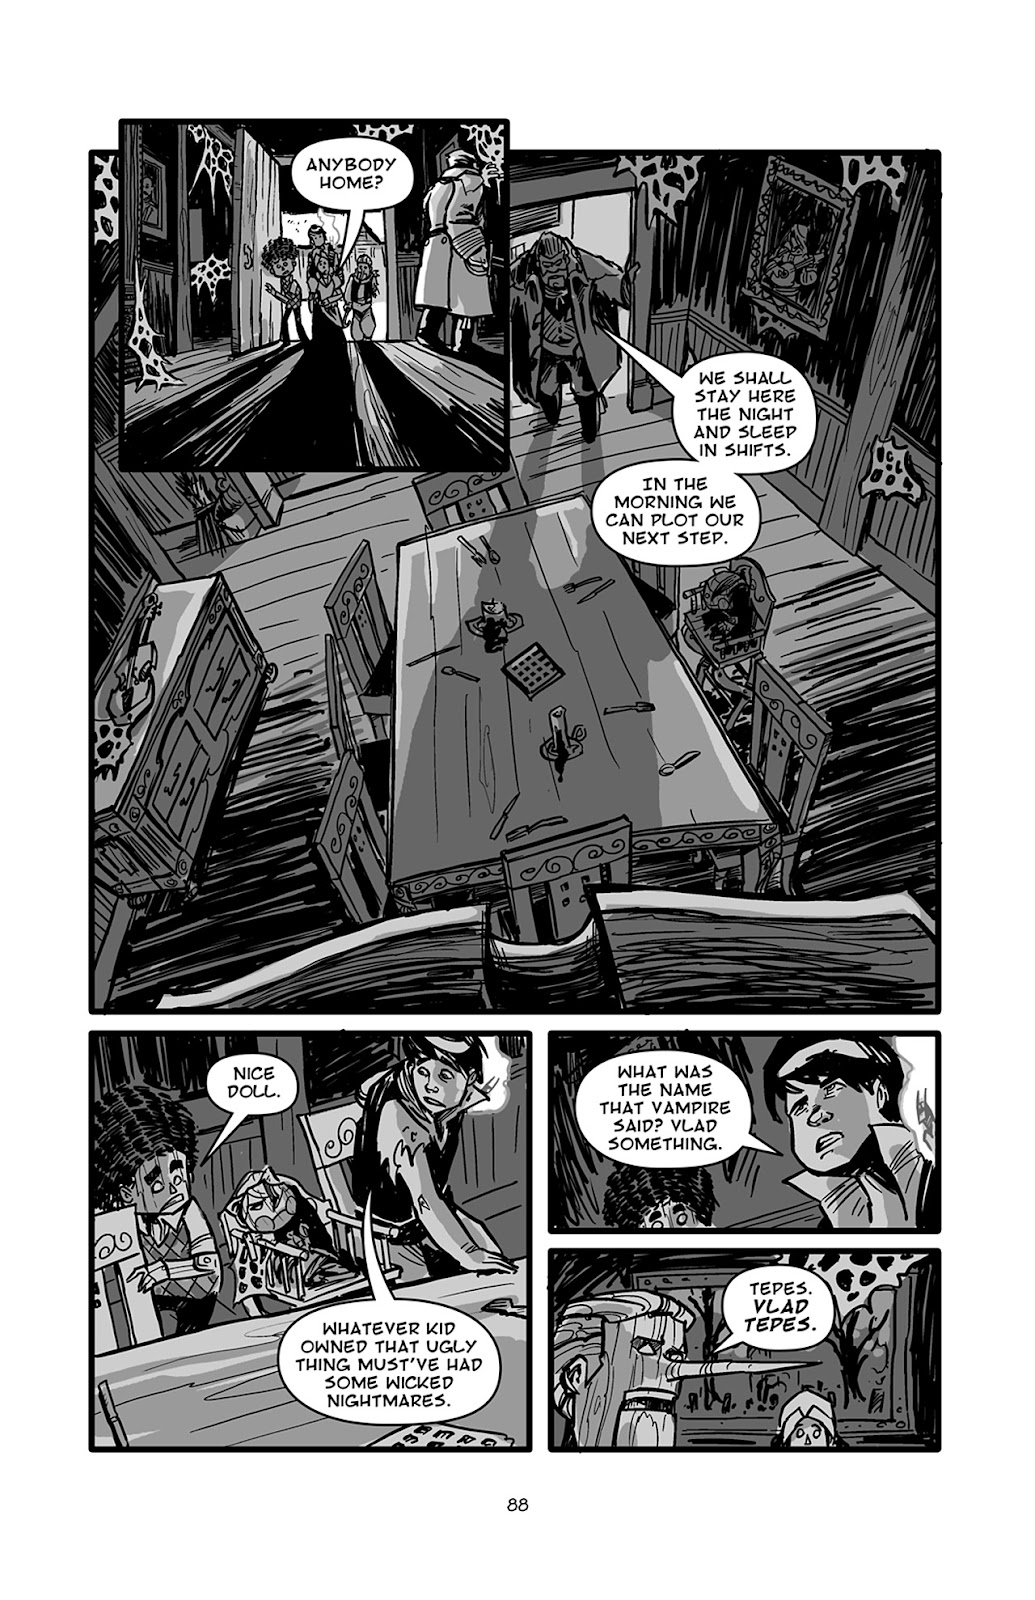 Pinocchio: Vampire Slayer - Of Wood and Blood issue 4 - Page 15